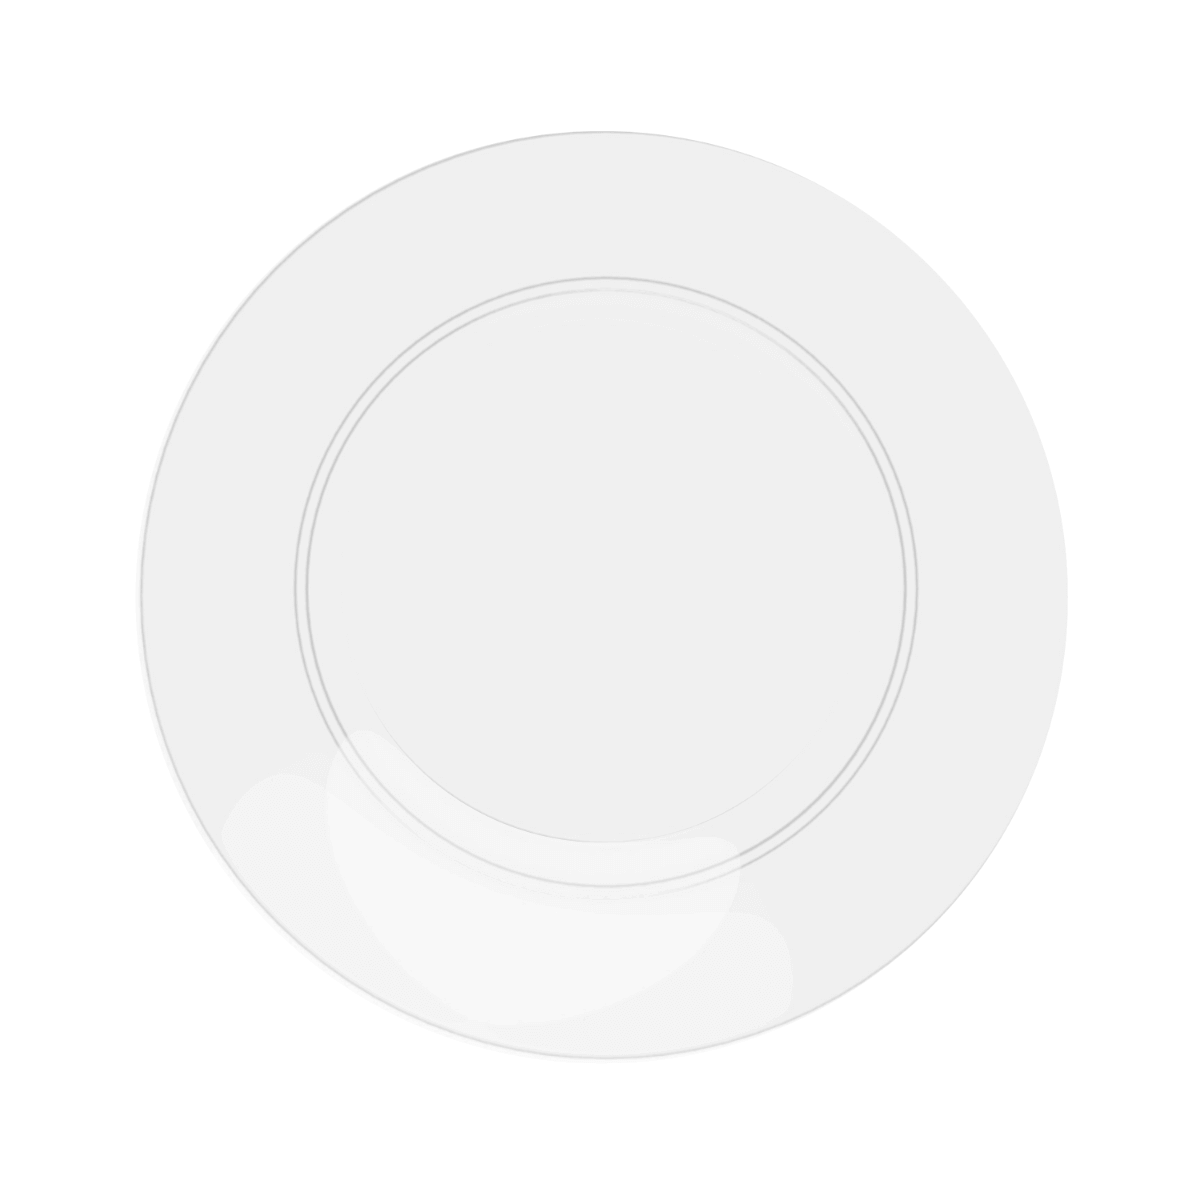 840 Piece Clear Combo Set | Serves 120 Guests